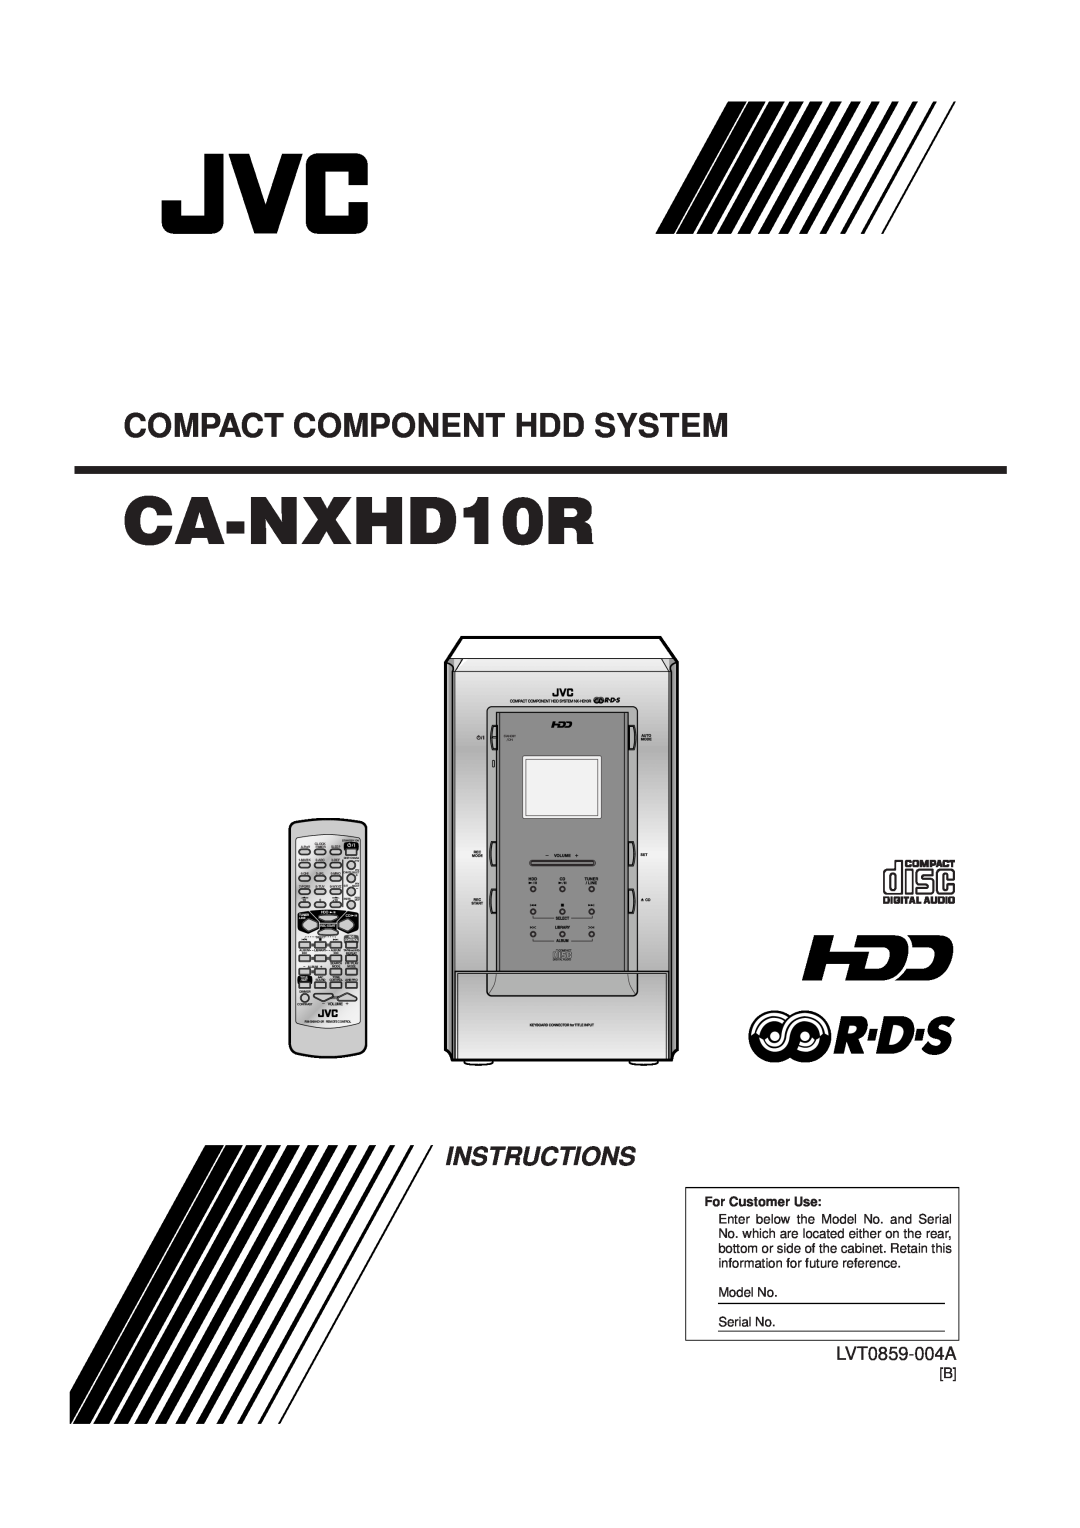 JVC CA-NXHD10R manual Compact Component Hdd System, LVT0859-004A, Instructions, For Customer Use, Tuner, Line, Rec Start 